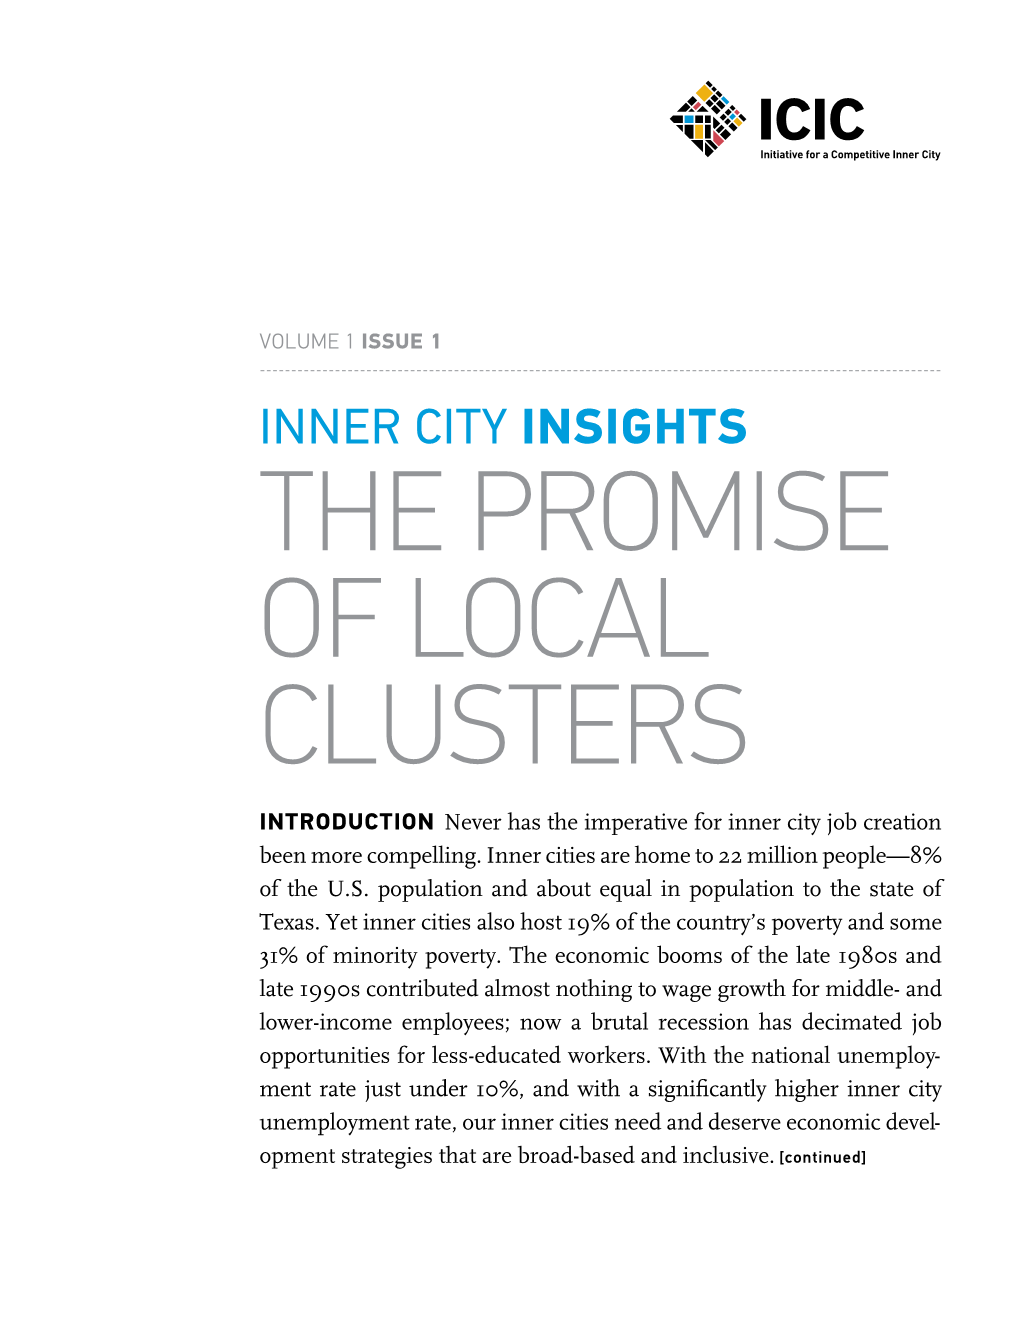 THE PROMISE of LOCAL CLUSTERS INTRODUCTION Never Has the Imperative for Inner City Job Creation Been More Compelling